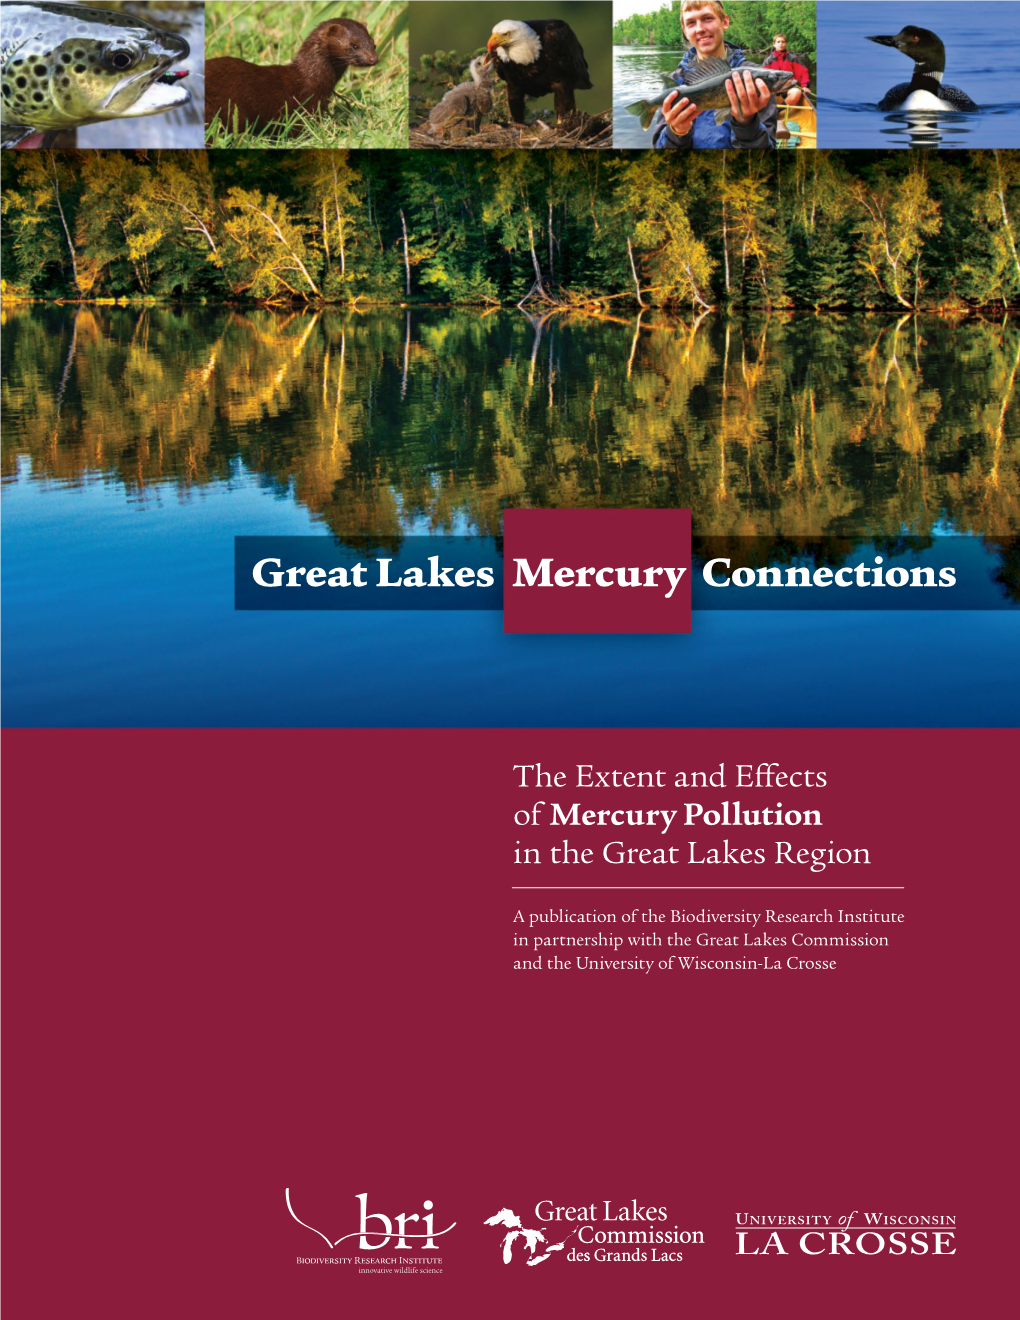 The Extent and Effects of Mercury Pollution in the Great Lakes Region